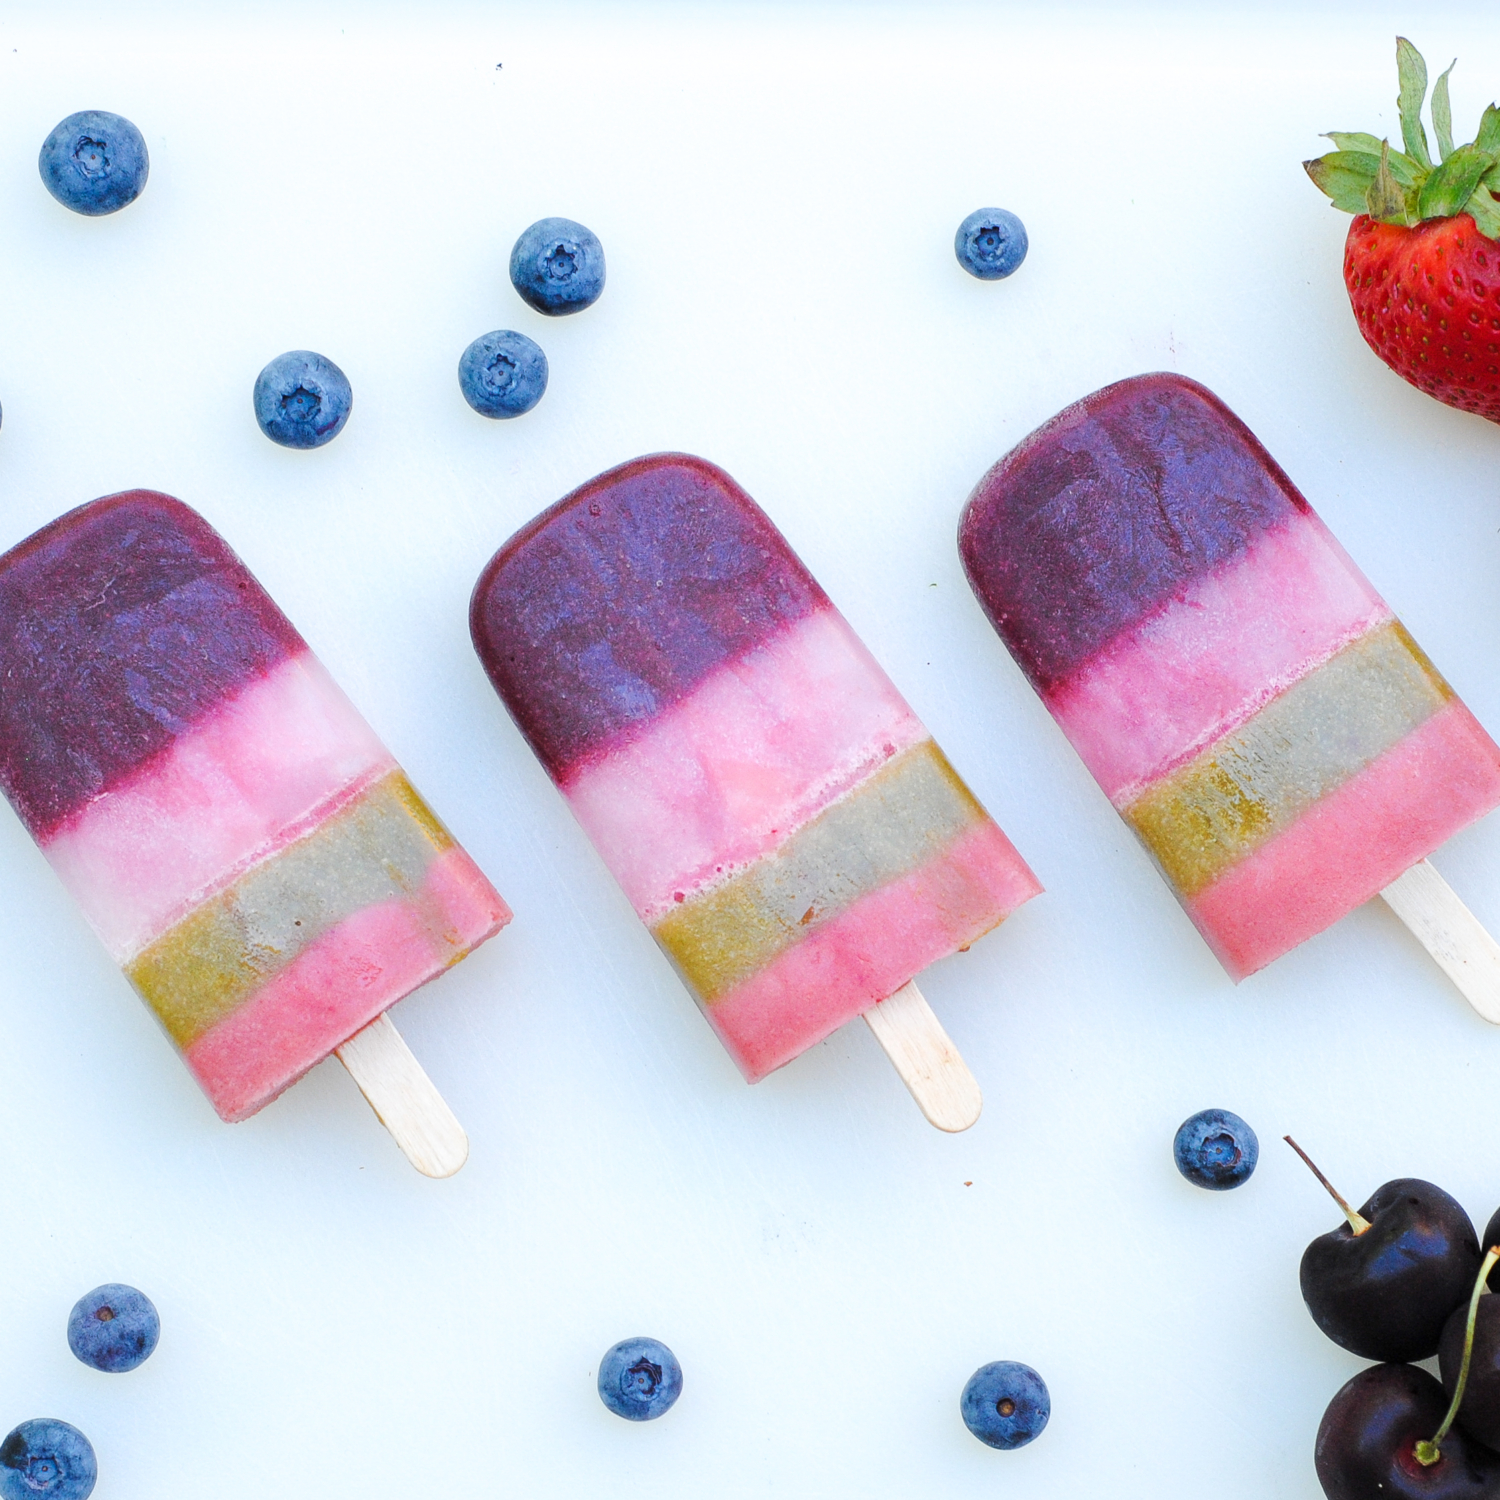 A healthy popsicle recipe that you could even give your kids for breakfast!